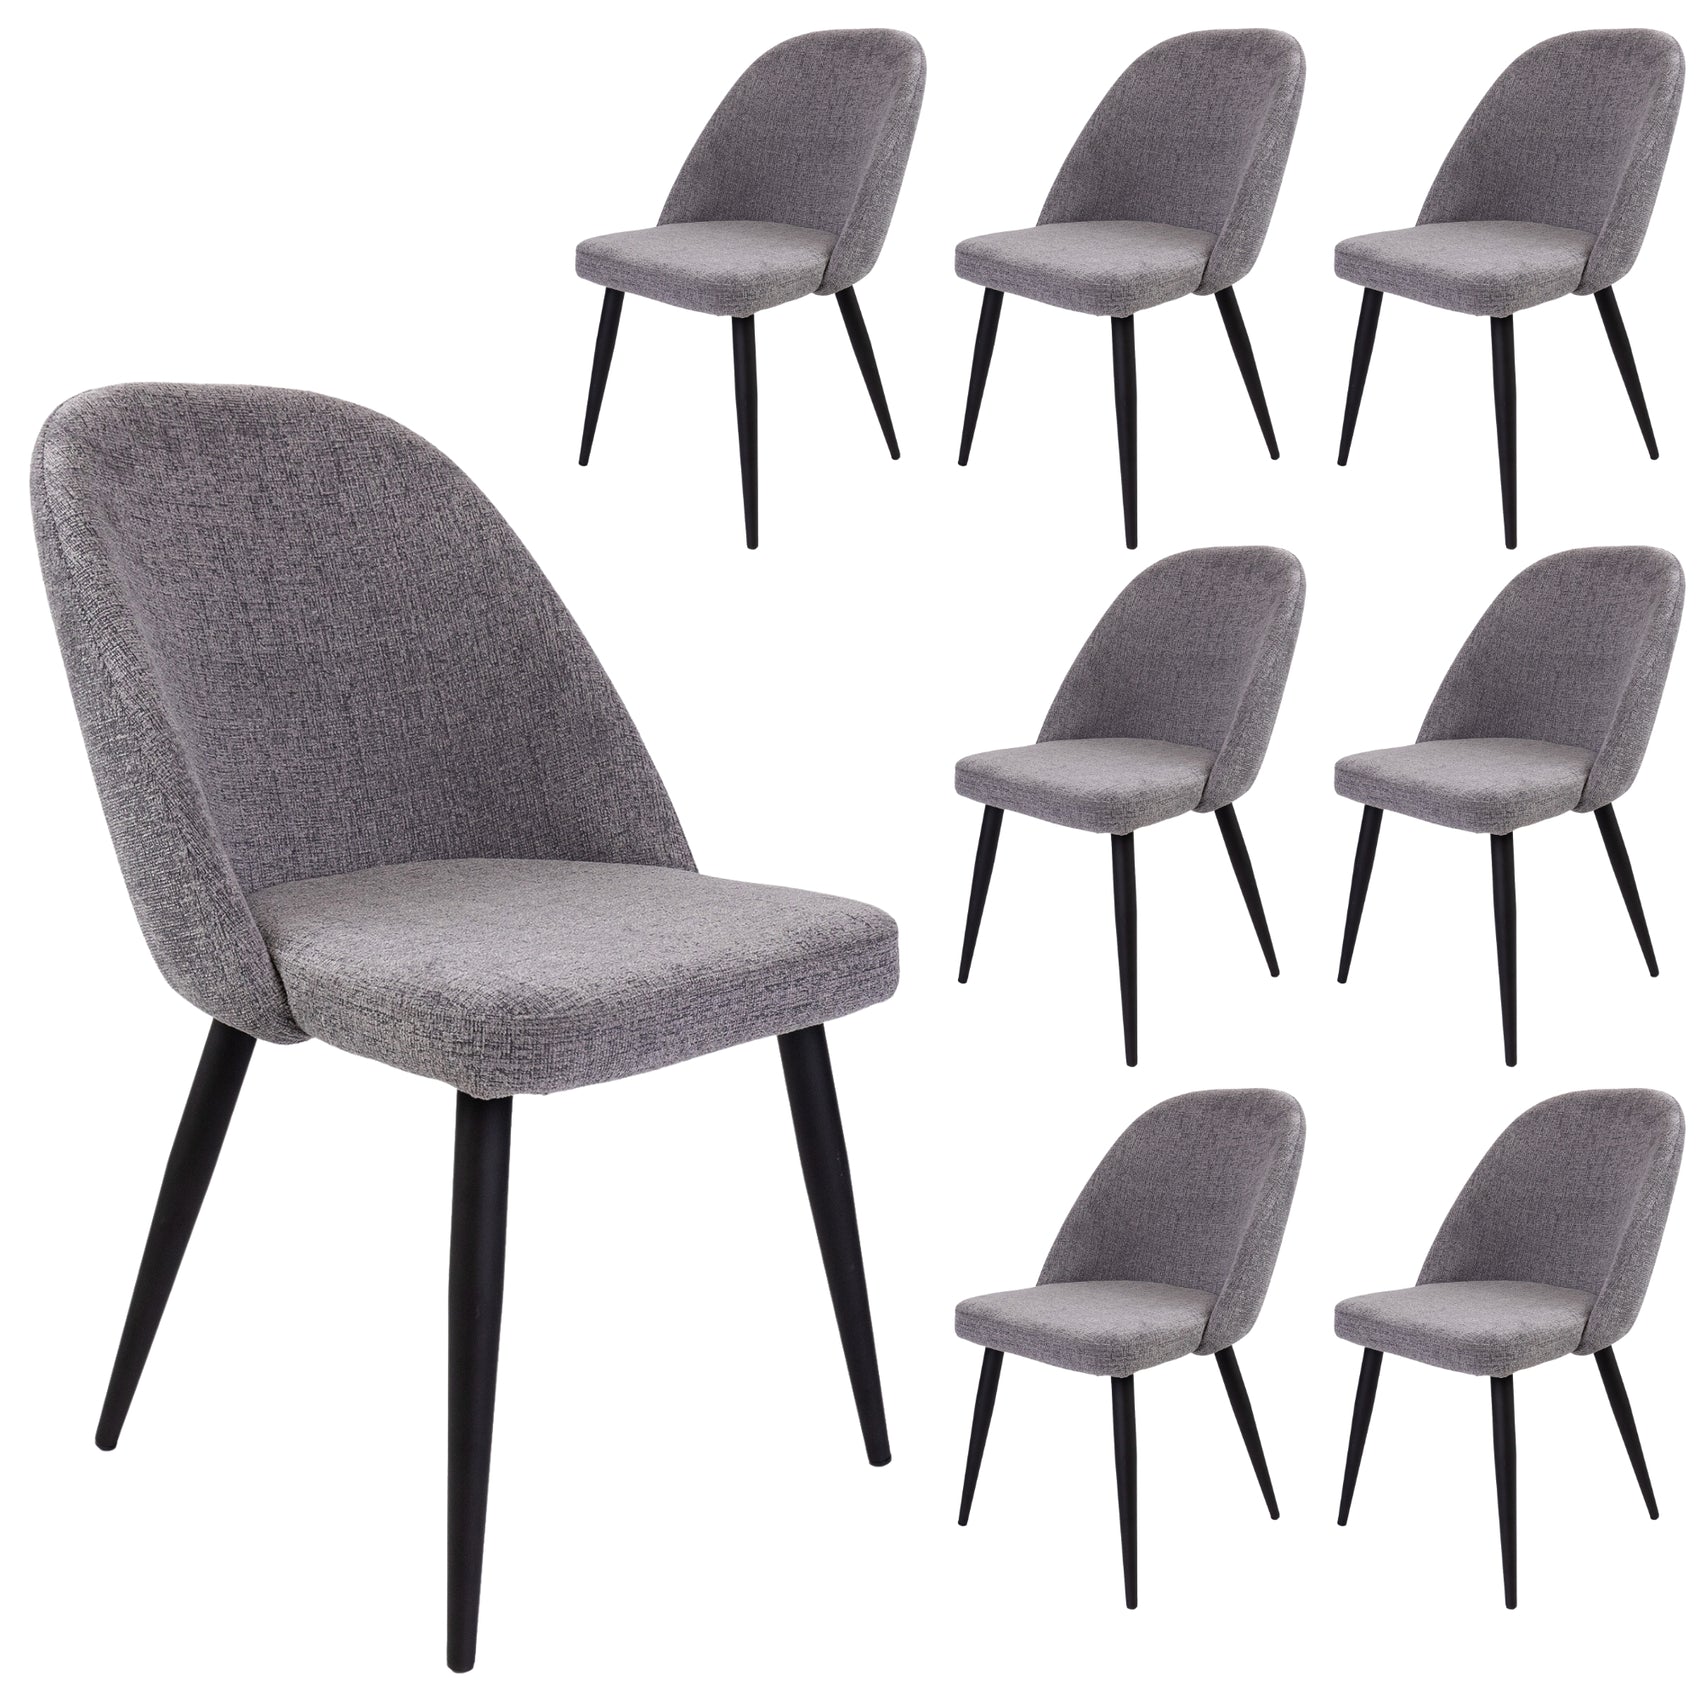 Erin Dining Chair Set of 8 Fabric Seat with Metal Frame - Fog